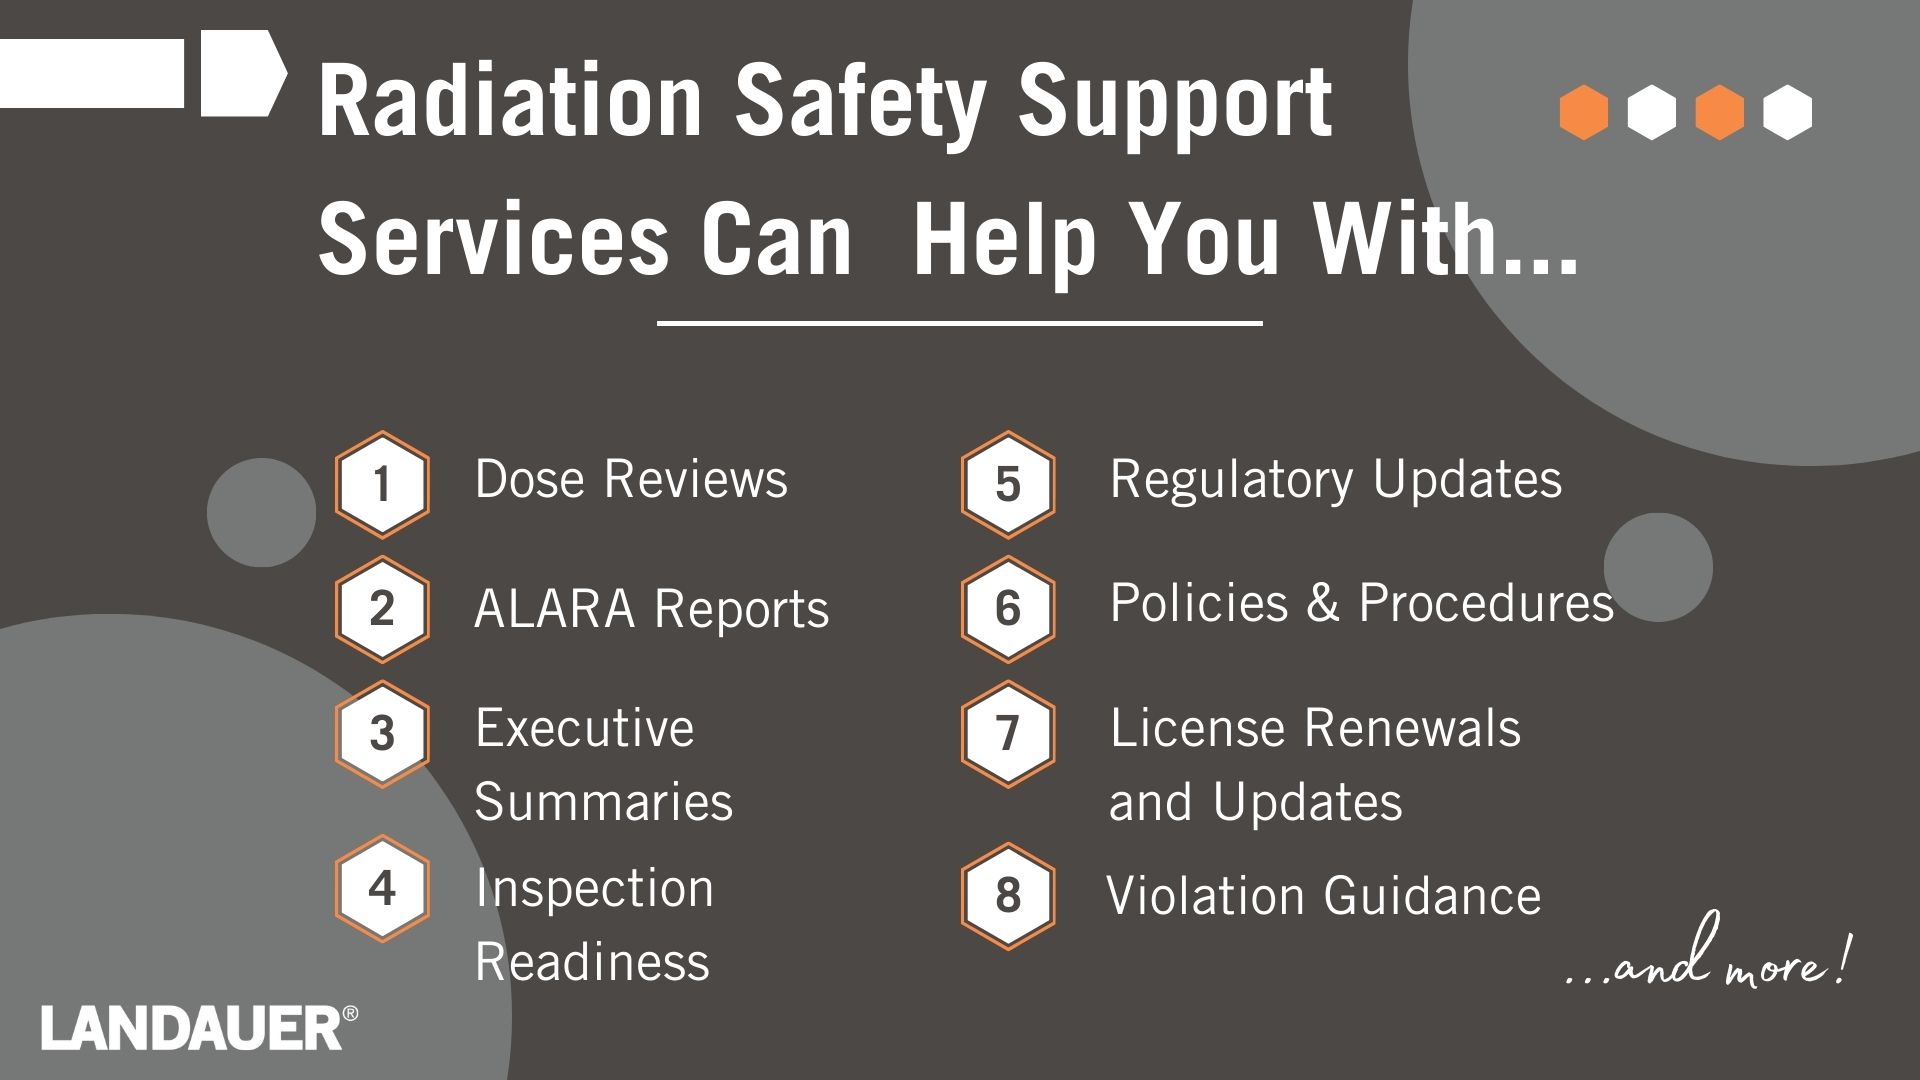 Radiation safety support services